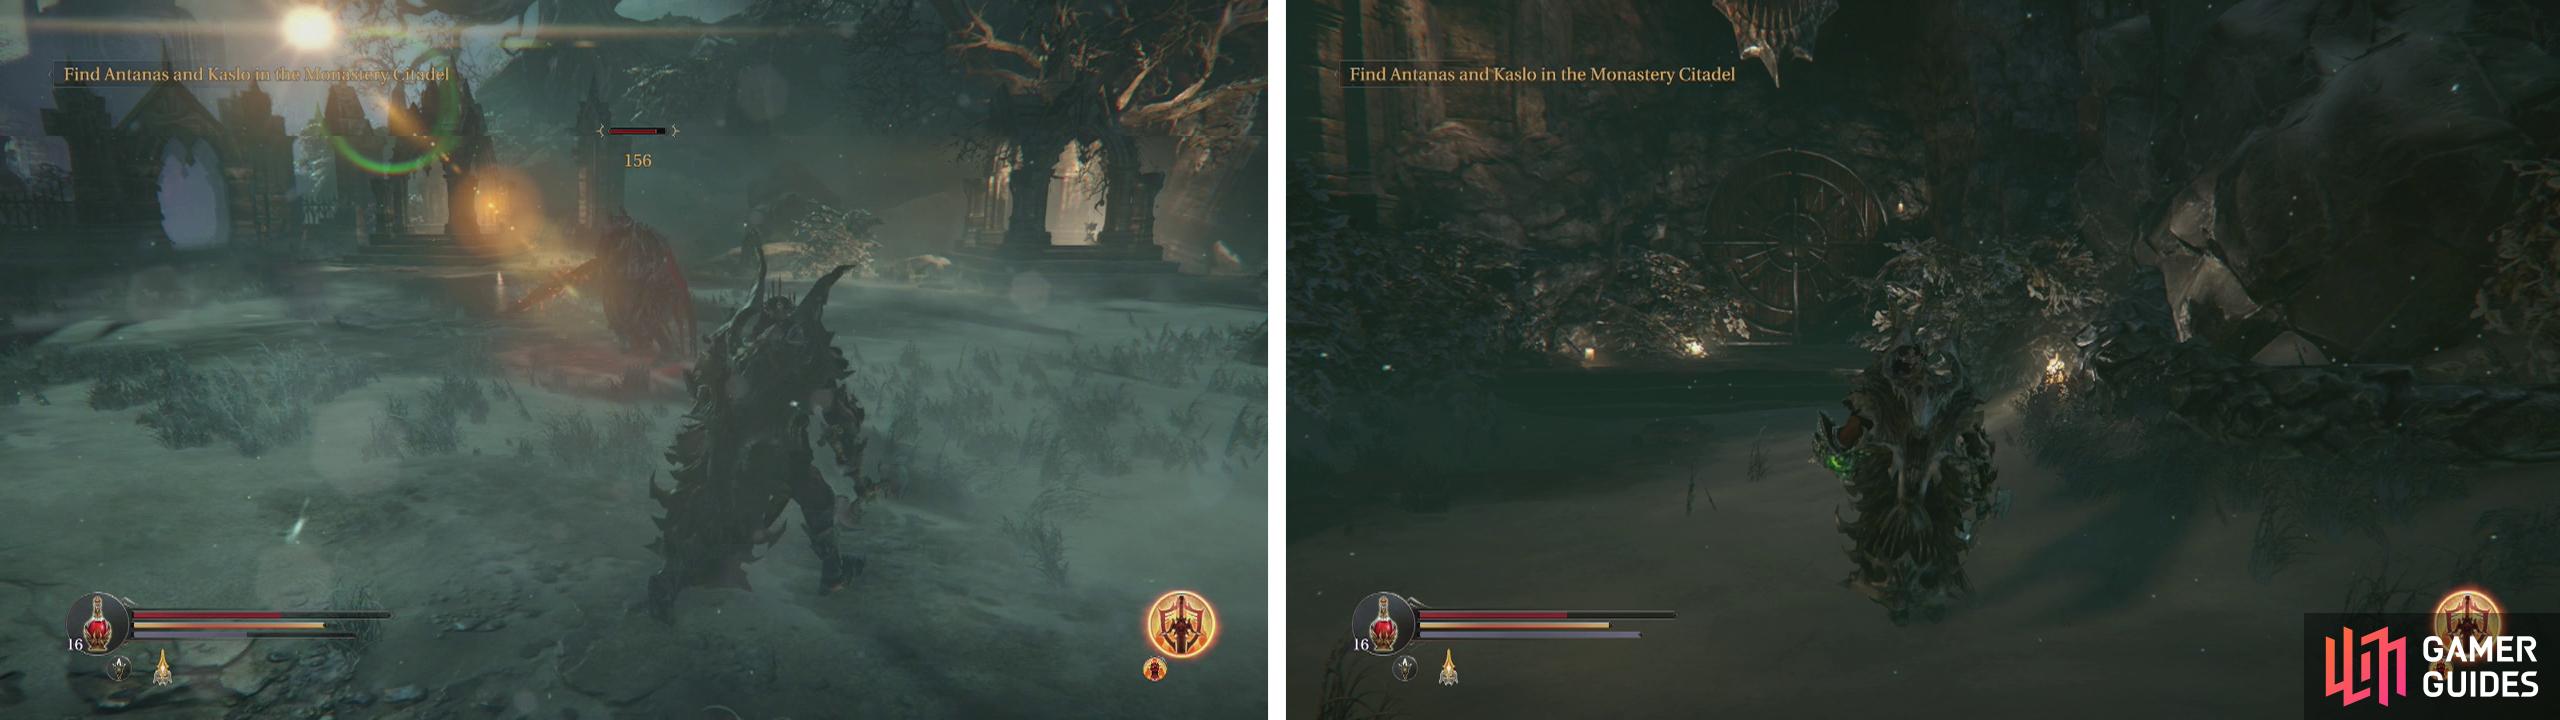 Kill the Warden in the graveyard (left) and then enter the door to the Catacombs (right).